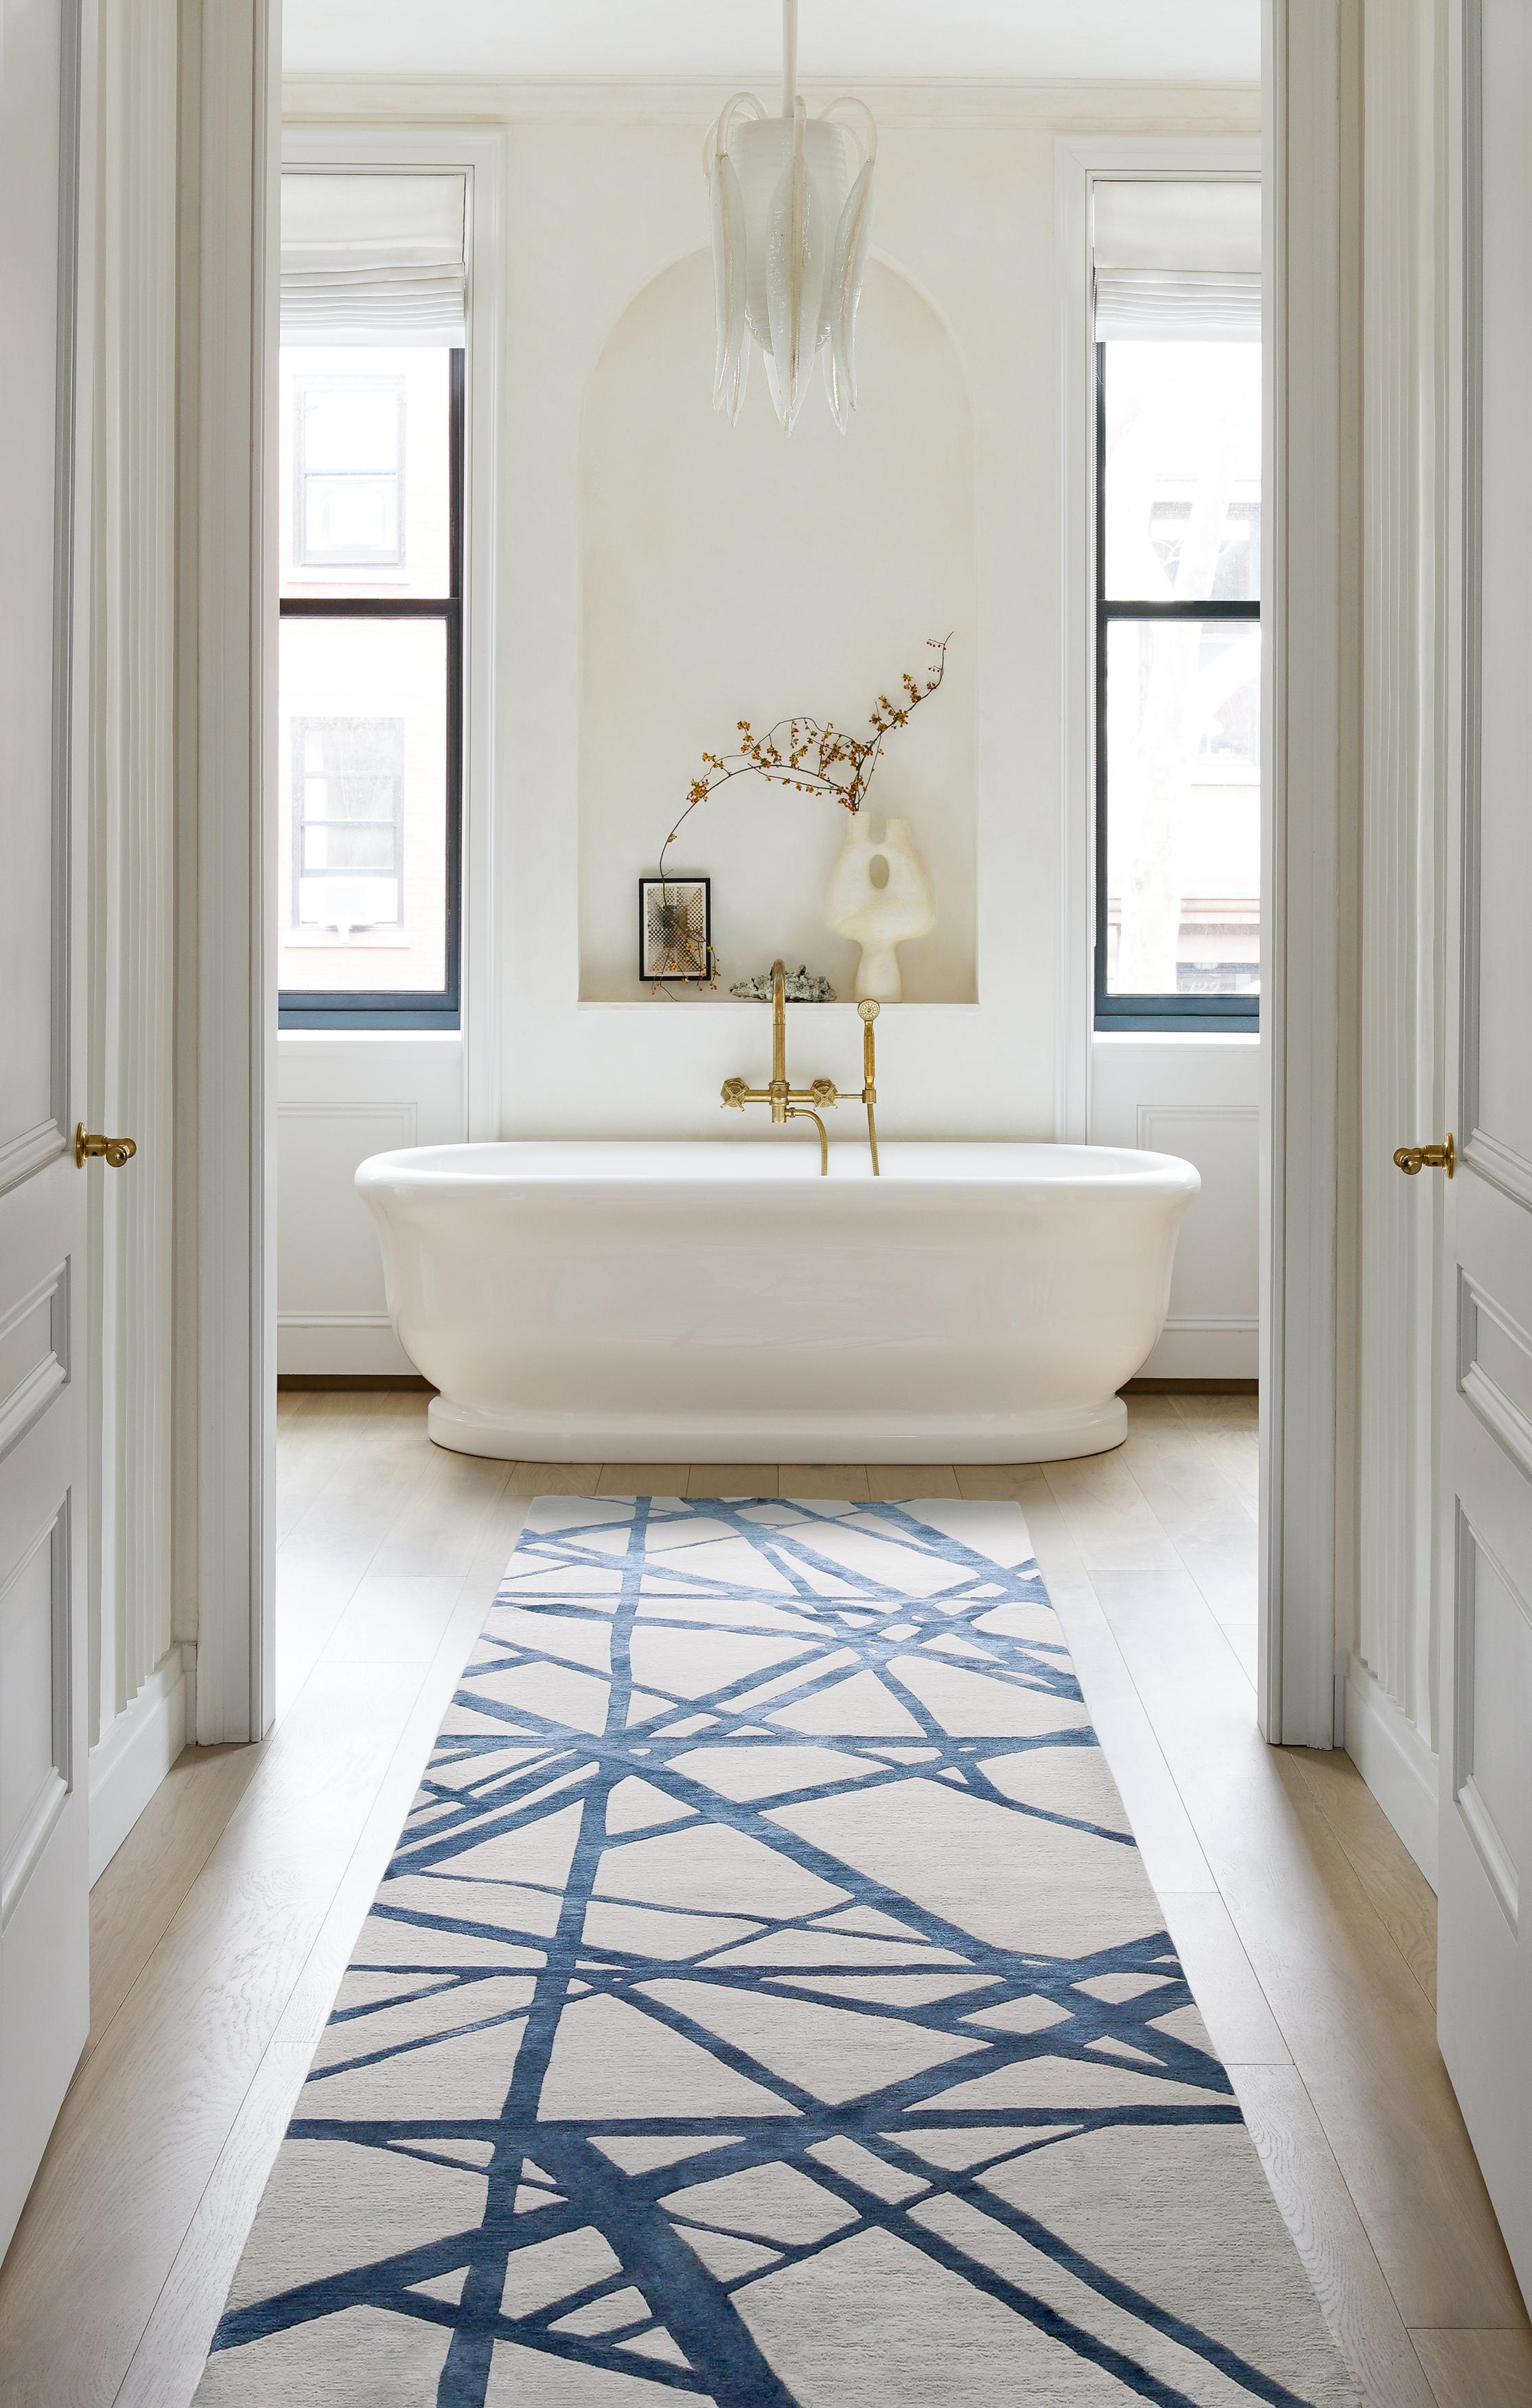 The Channels Indigo runner is an adaption of Kelly’s bestselling Channels Copper rug design, which was created exclusively for TRC20, The Rug Company’s 20th Anniversary. The Channels design represents Kelly Wearstler's interest in street art and